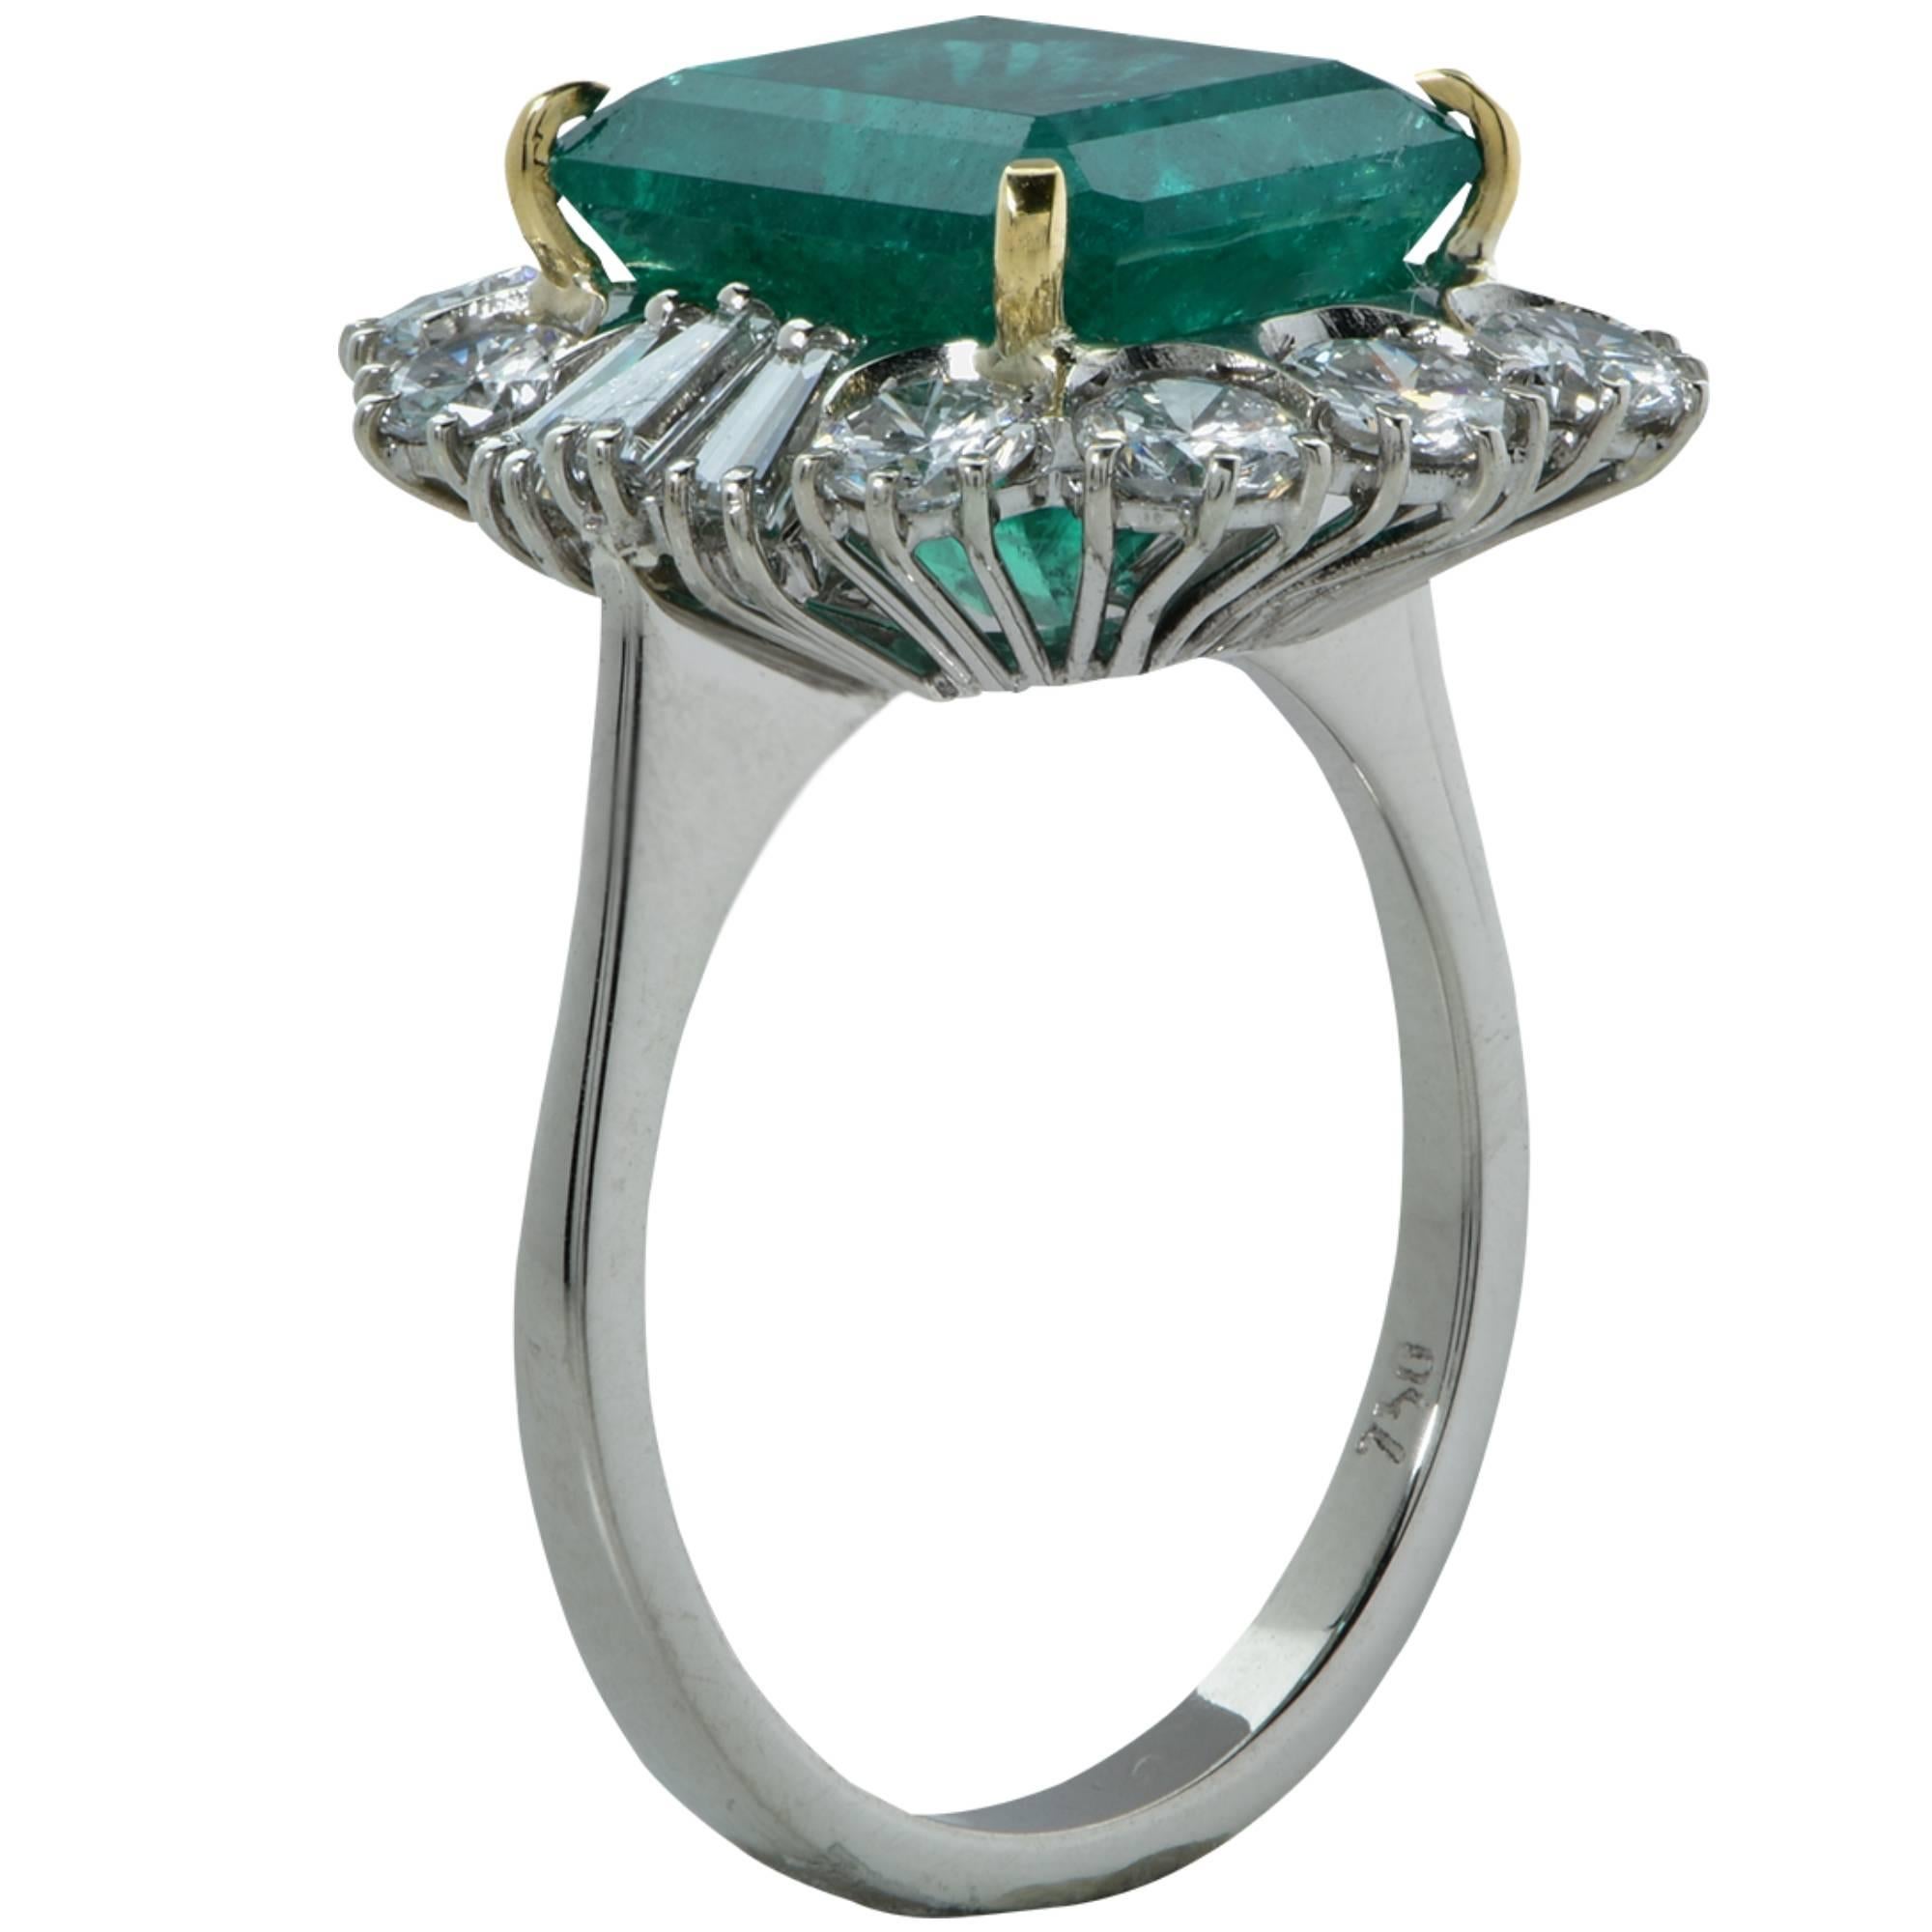 Emerald Cut GIA Certified 6.59 Carat Colombian Emerald and Diamond Ring